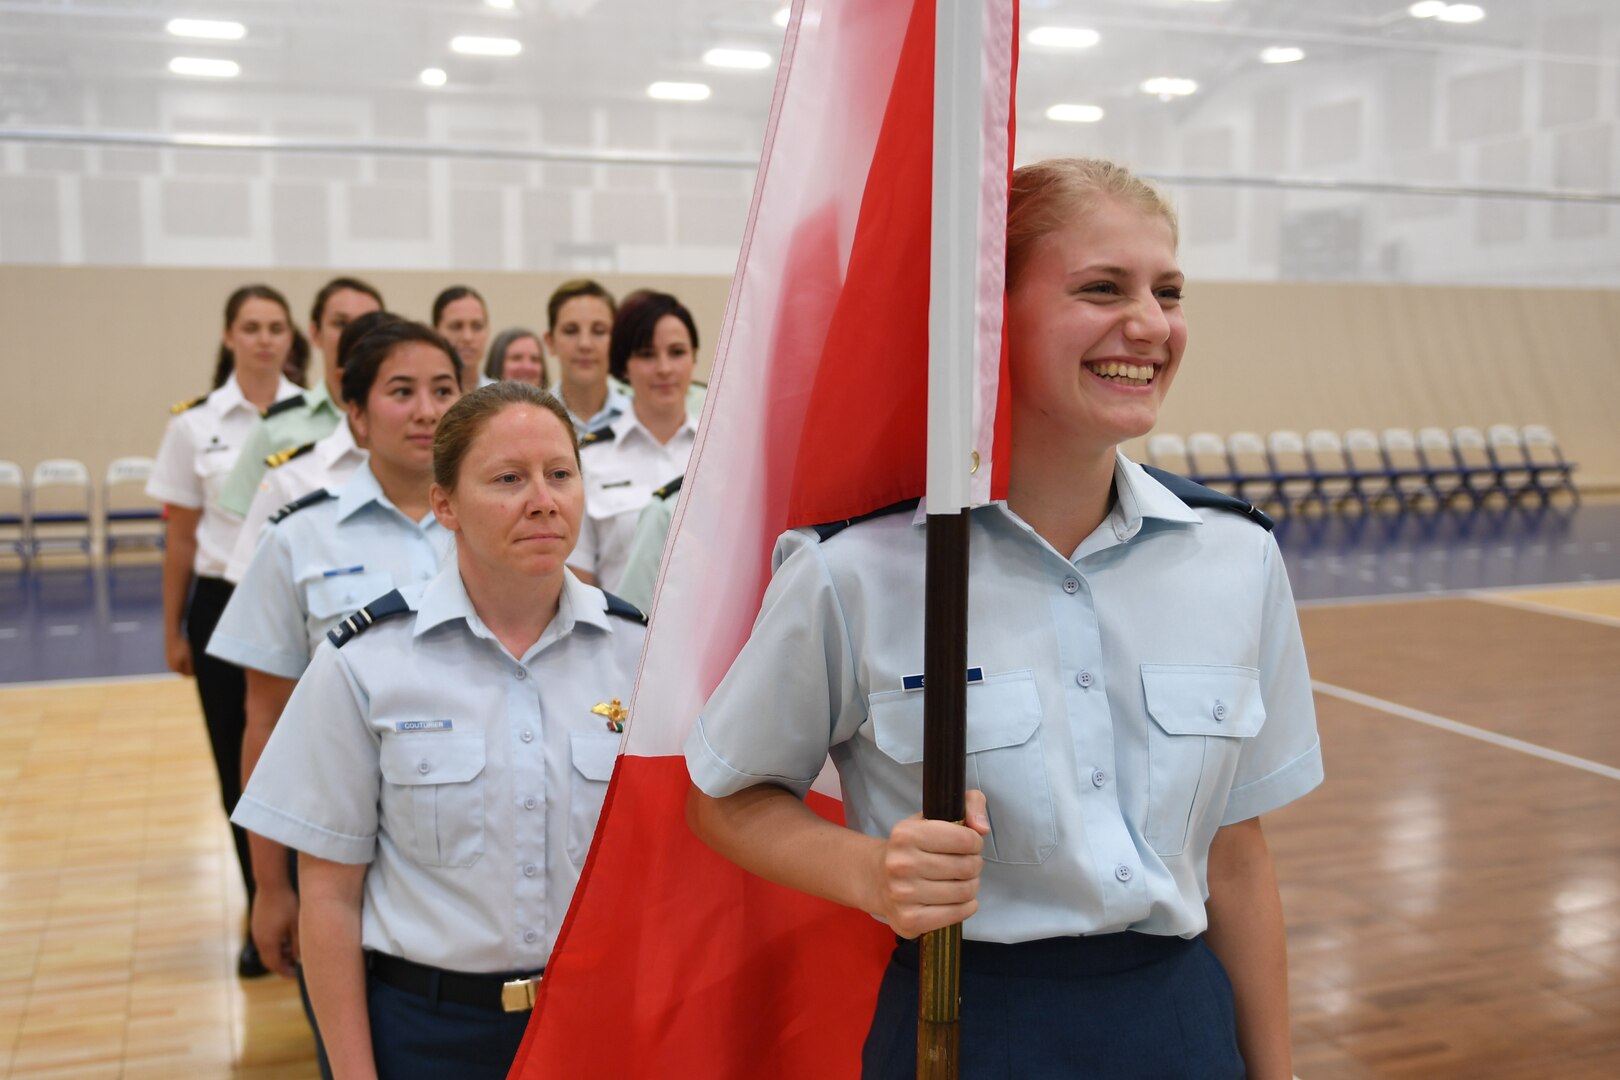 170603-N-UK306-025 JACKSONVILLE, Fla. (June 3, 2017)  Compeititors ftom Team Canada take part in the opening ceremony of the Conseil International du Sport Militaire (CISM) World Military Women's Volleyball Championship at Naval Station Mayport.  Teams from the United States, Canada, China, Germany and The Netherlands will compete June 4-9, while promoting peace activities and solidarity among athletes. (U.S. Navy photo by Mass Communication Specialist 2nd Class Timothy Schumaker/Released)